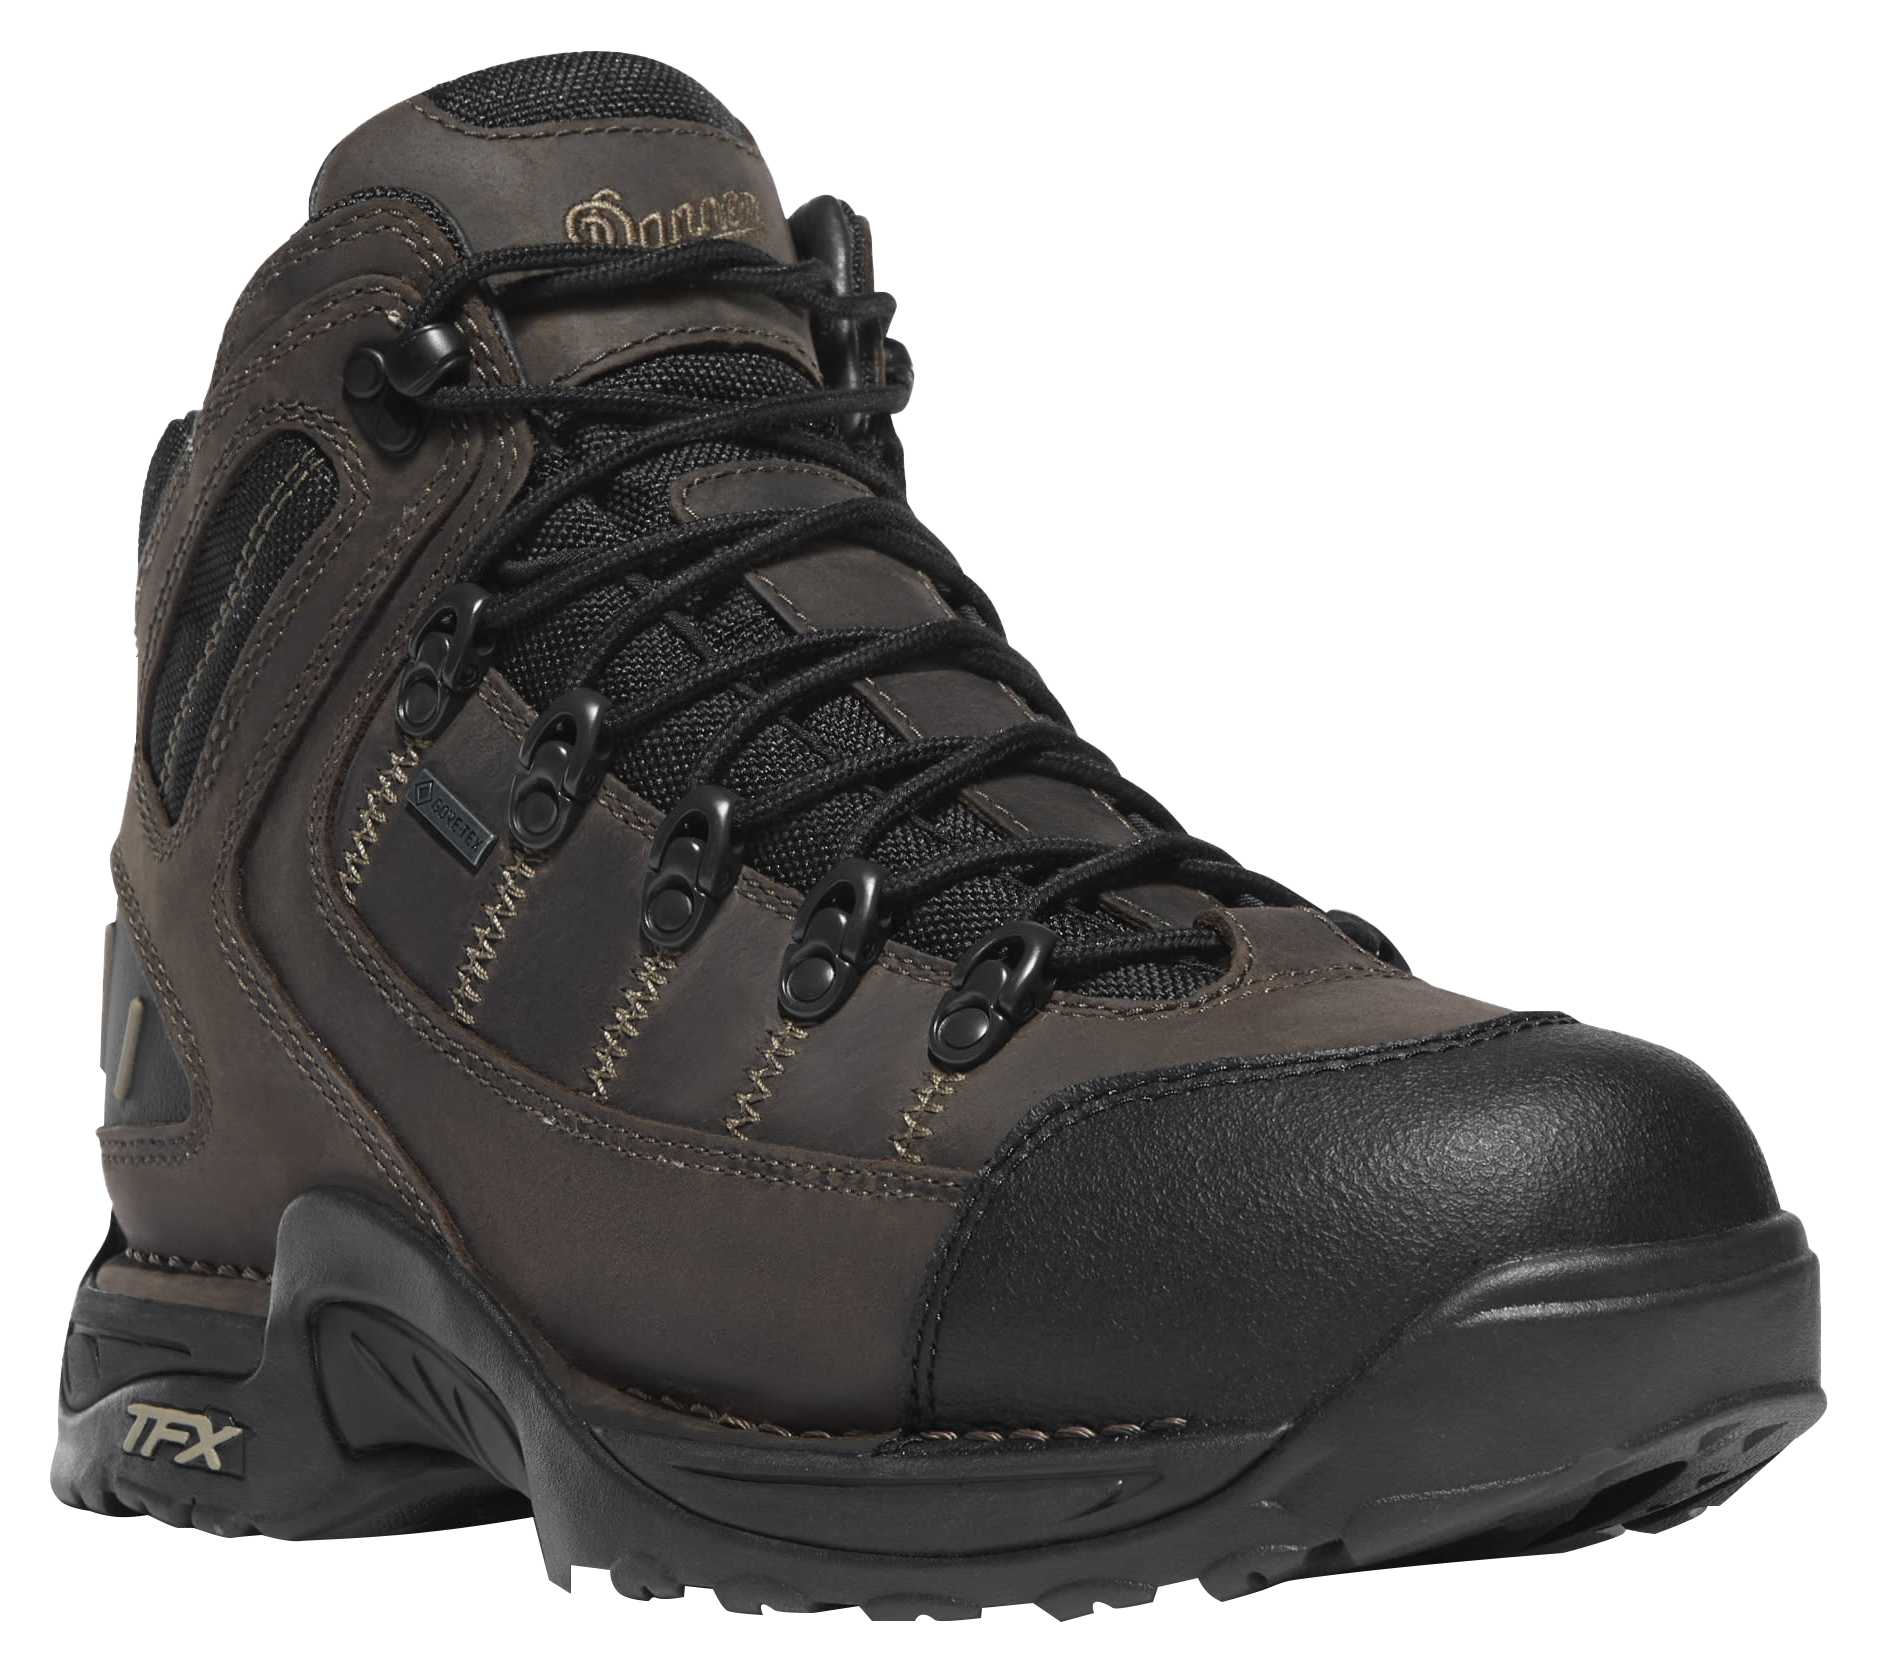 Danner 453 GORE-TEX Waterproof Hiking Boots for Men - Loam Brown/Chocolate Chip - 14M